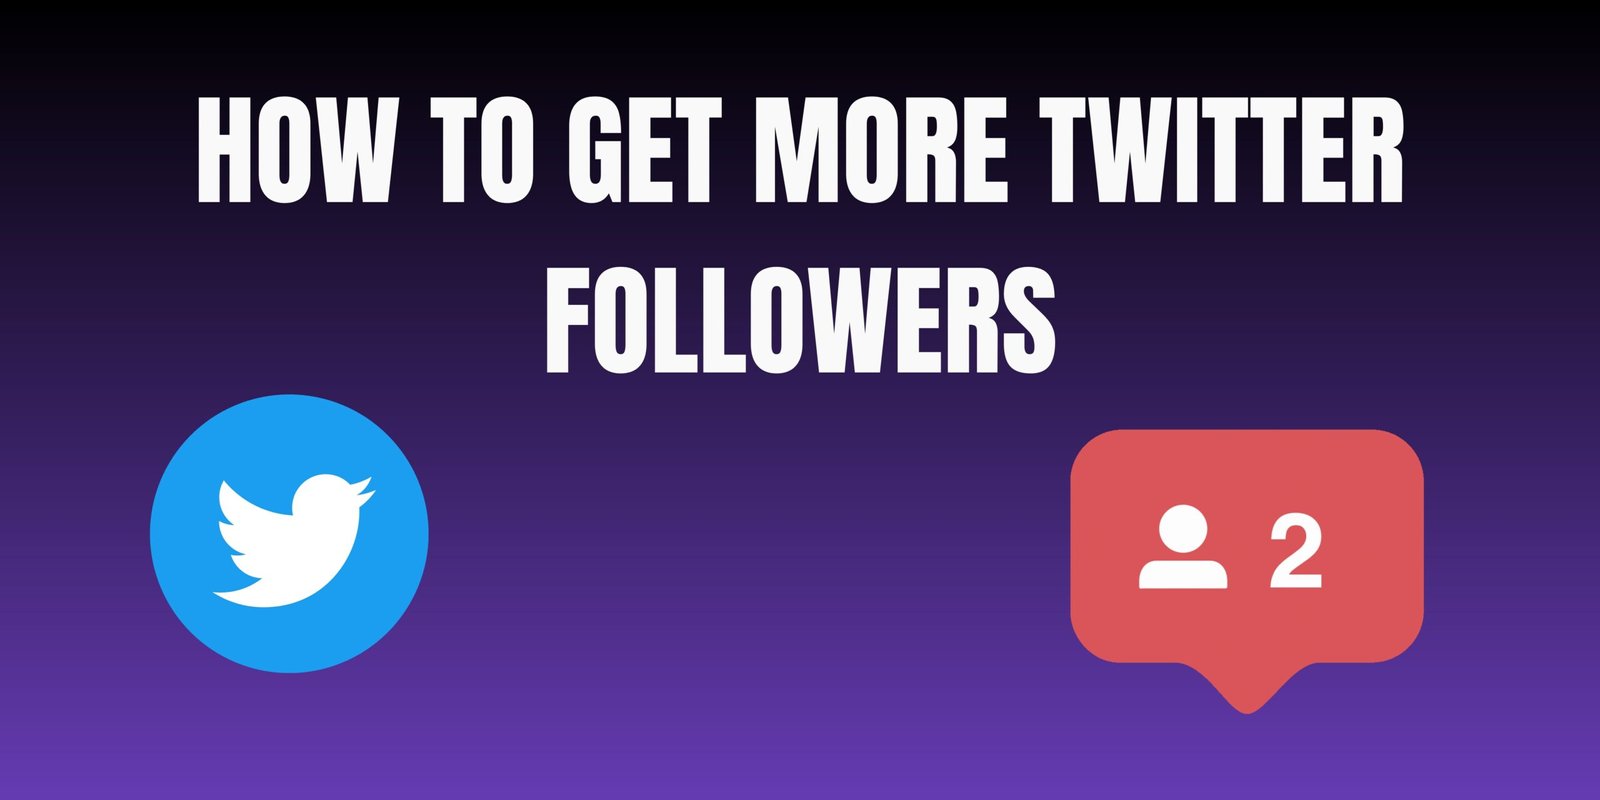 How to Get More Twitter Followers: 15 Proven Ways